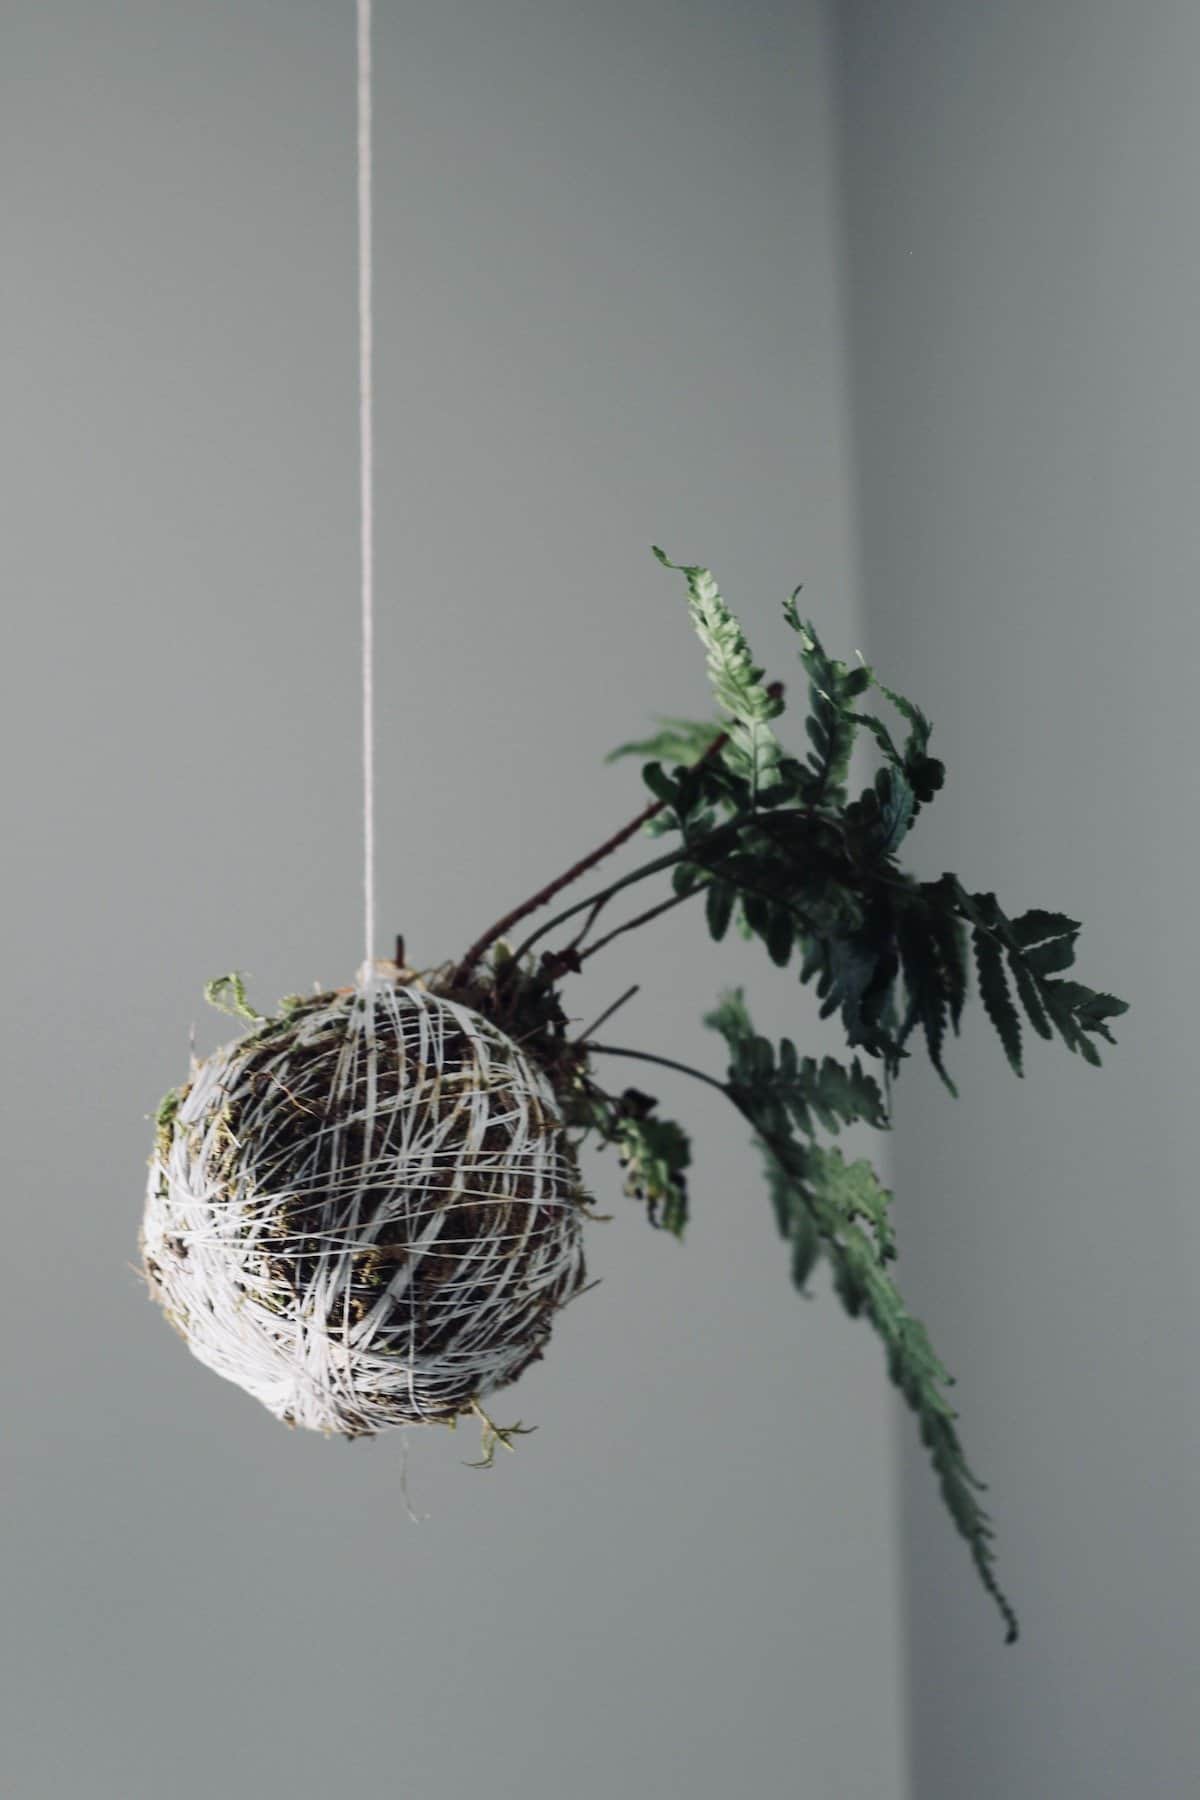 Green fern planted in moss ball hanging from white string against a white background